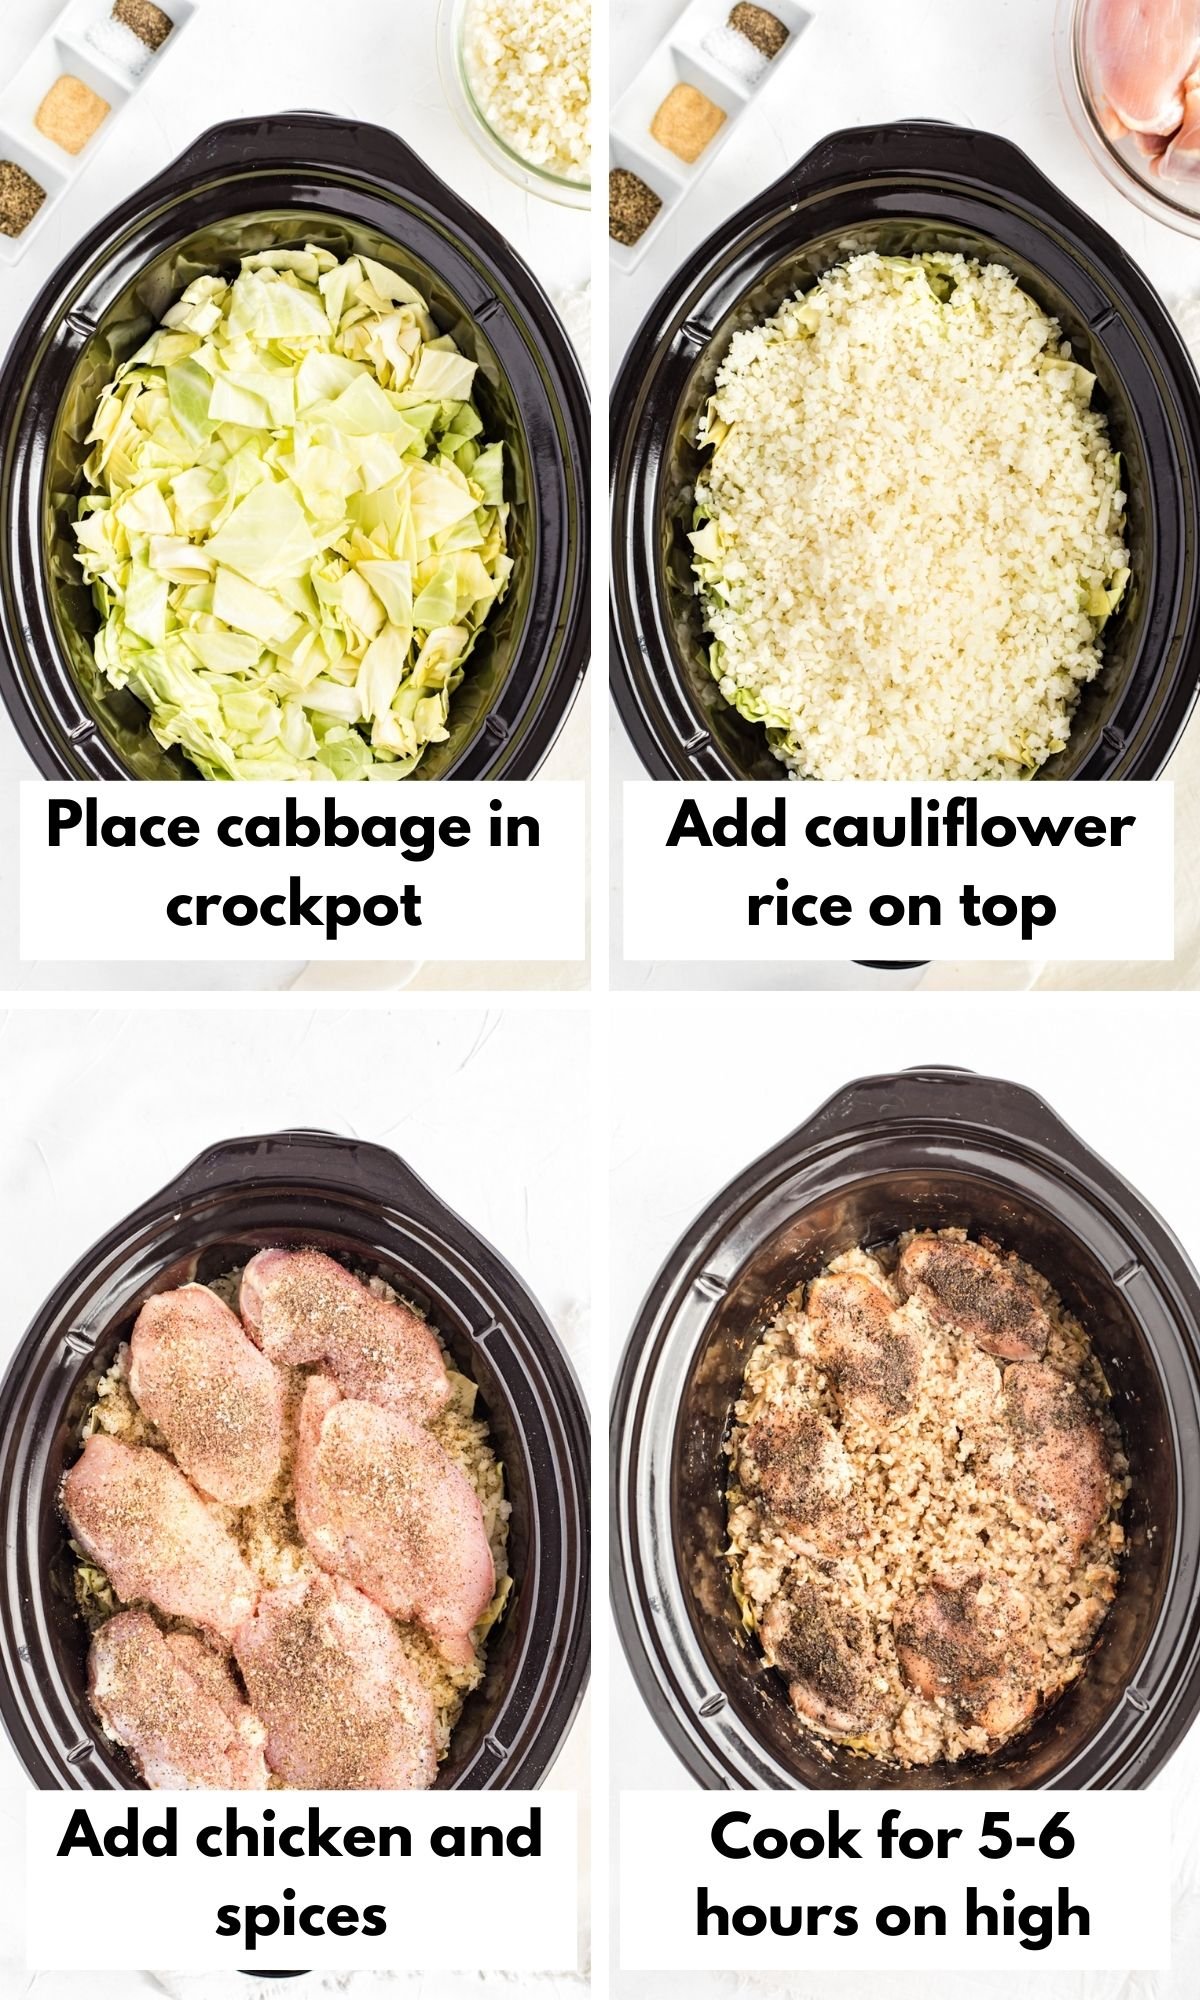 labeled process photos for crockpot chicken and cabbage dish.